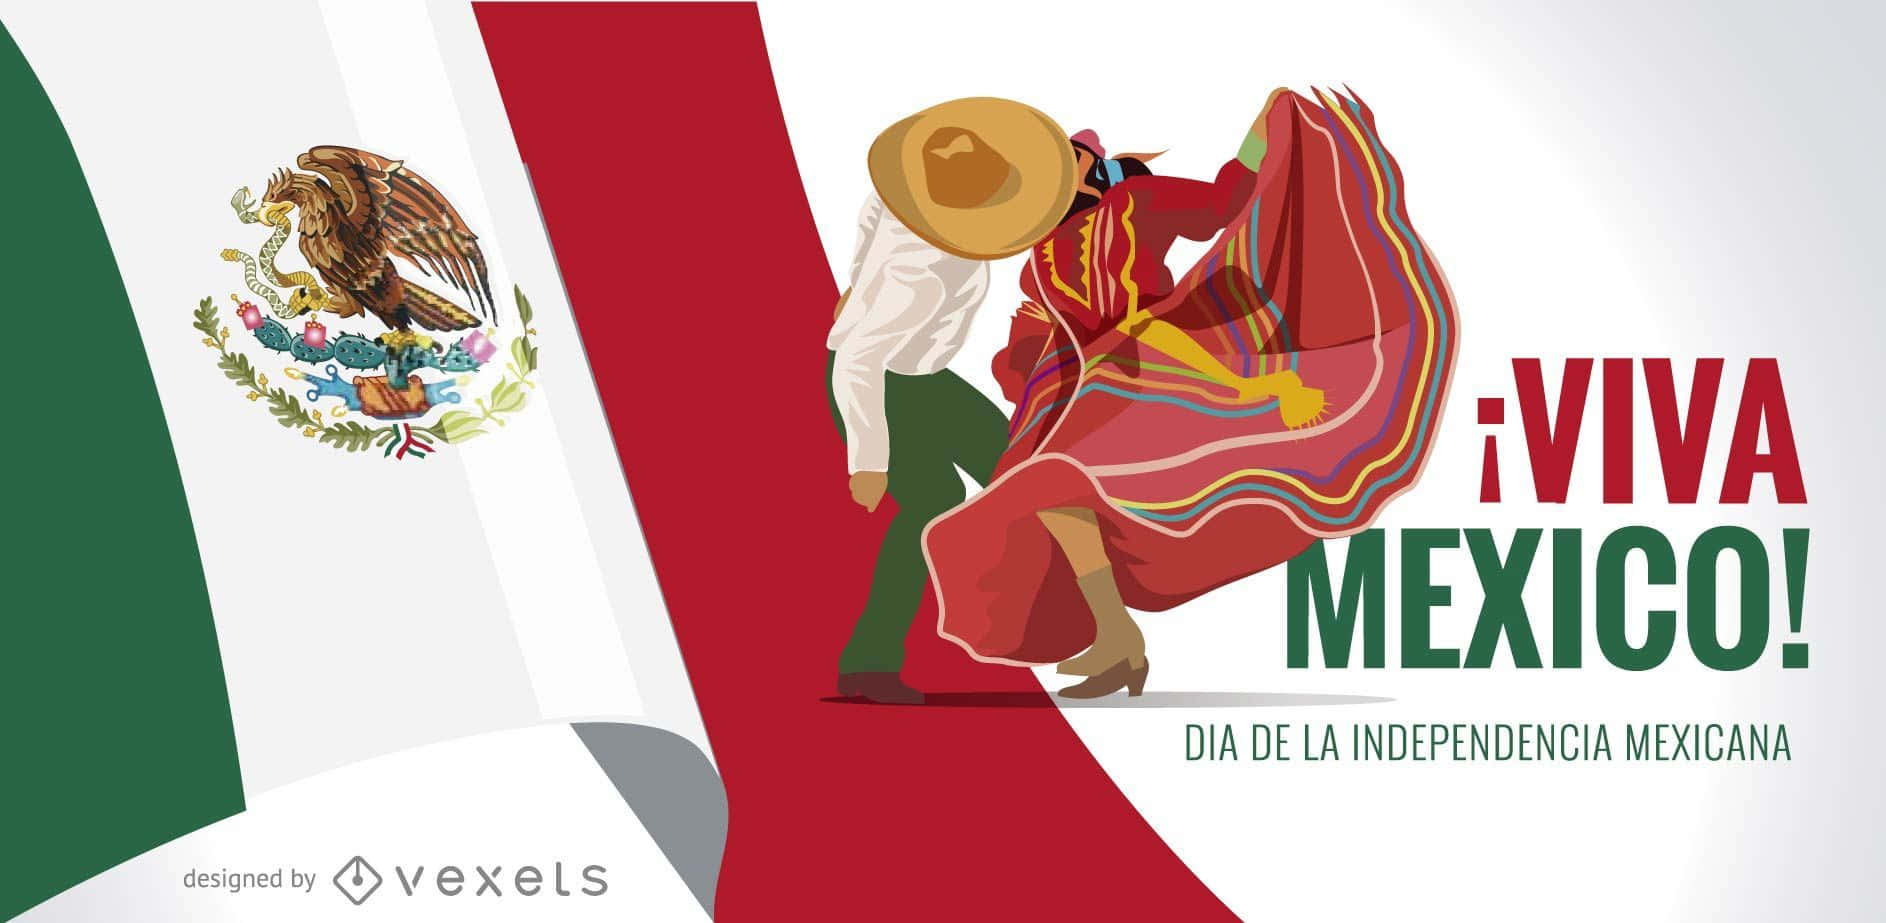 “viva Mexico! Celebrating The Country's Cultural Heritage.”